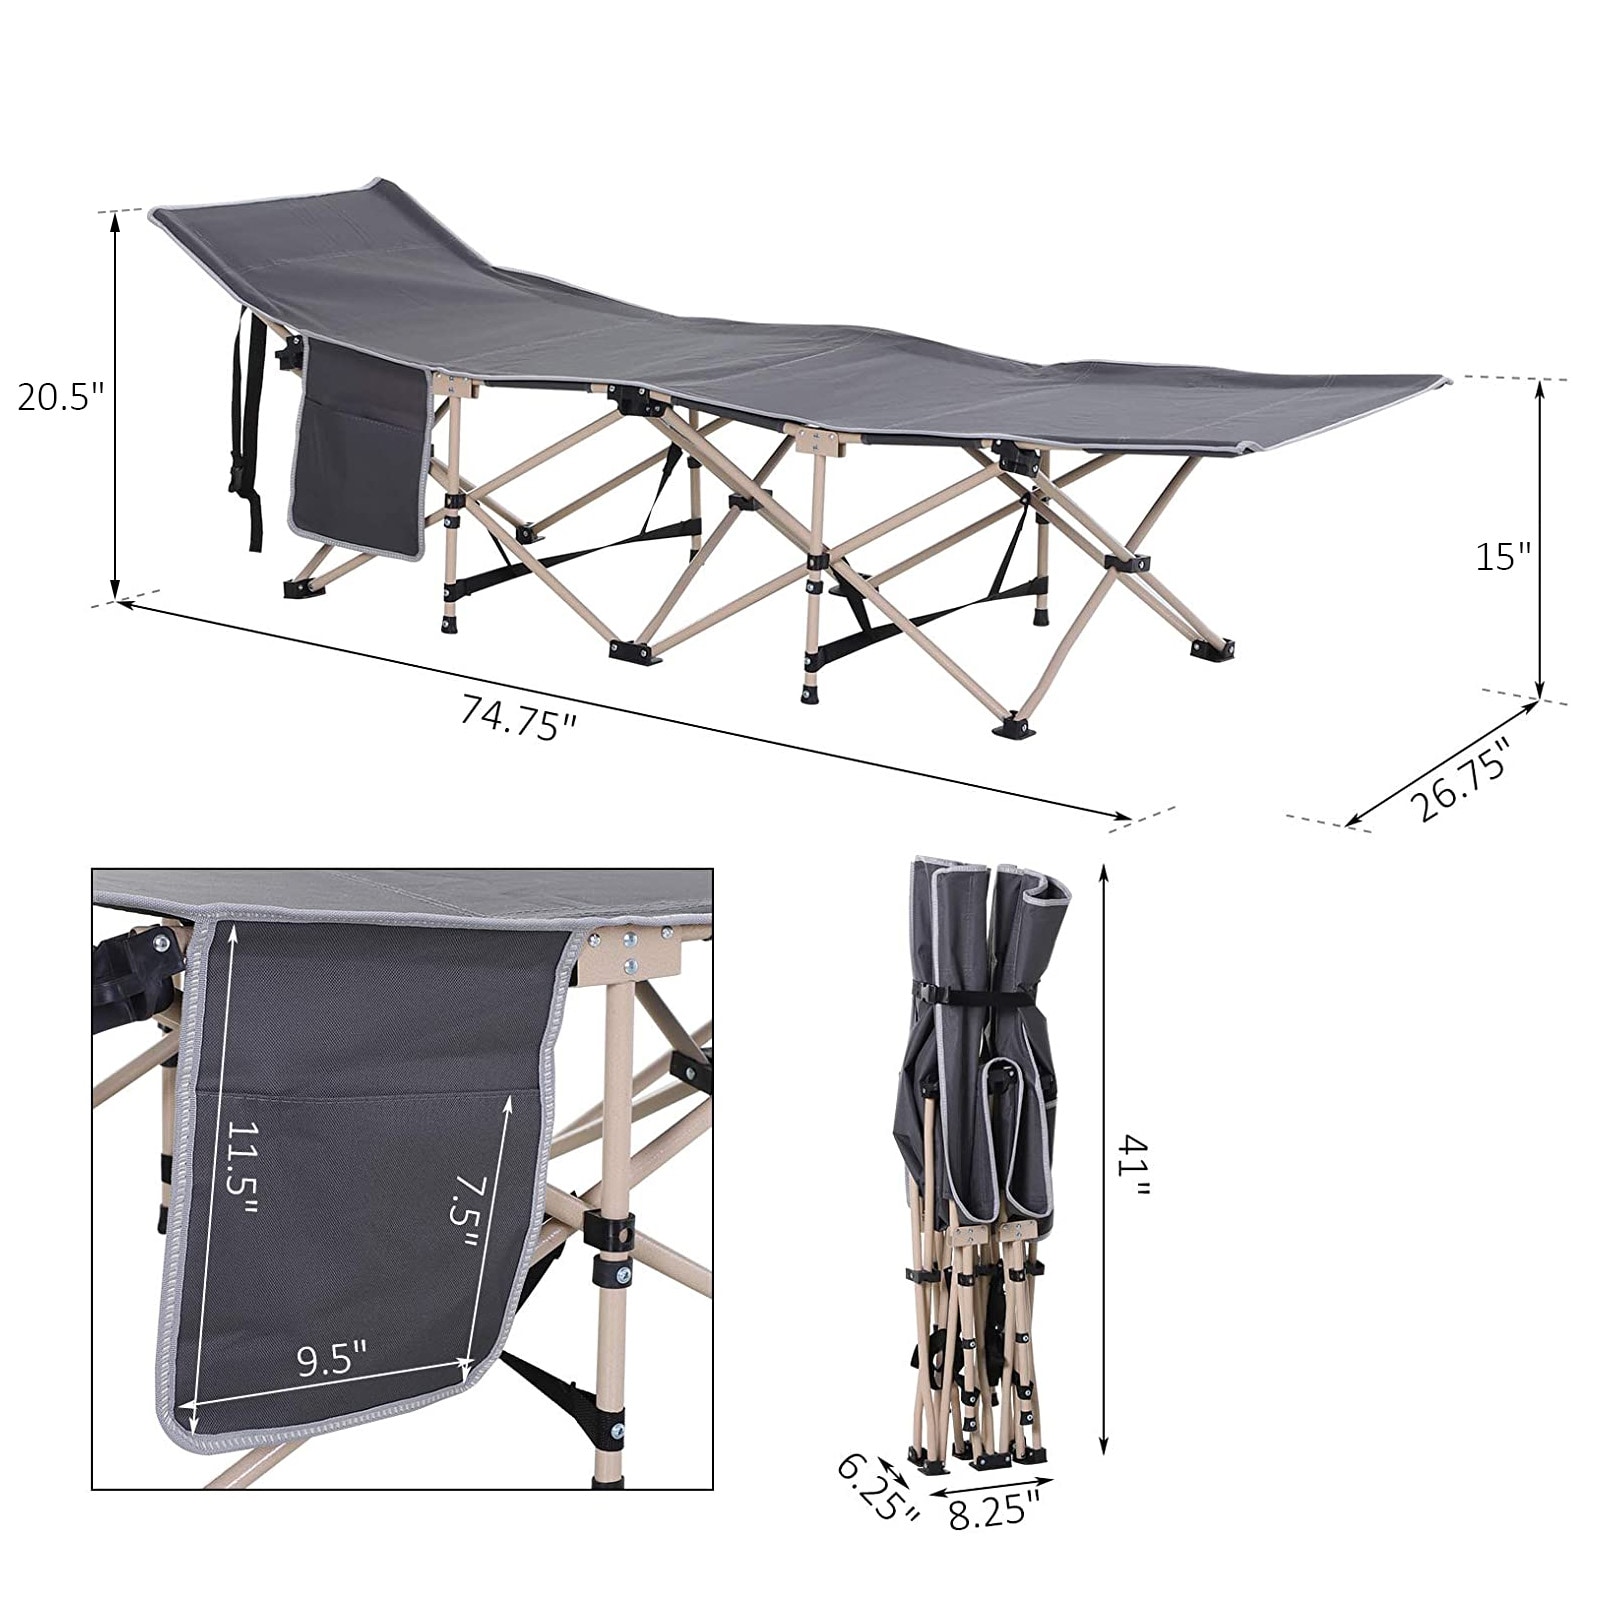 Yaheetech Camp Bed Folding Single Camping Bed with Storage Bag for Adults/Kids/Children/Fishing/Outdoor/Indoor/Tent Gray 